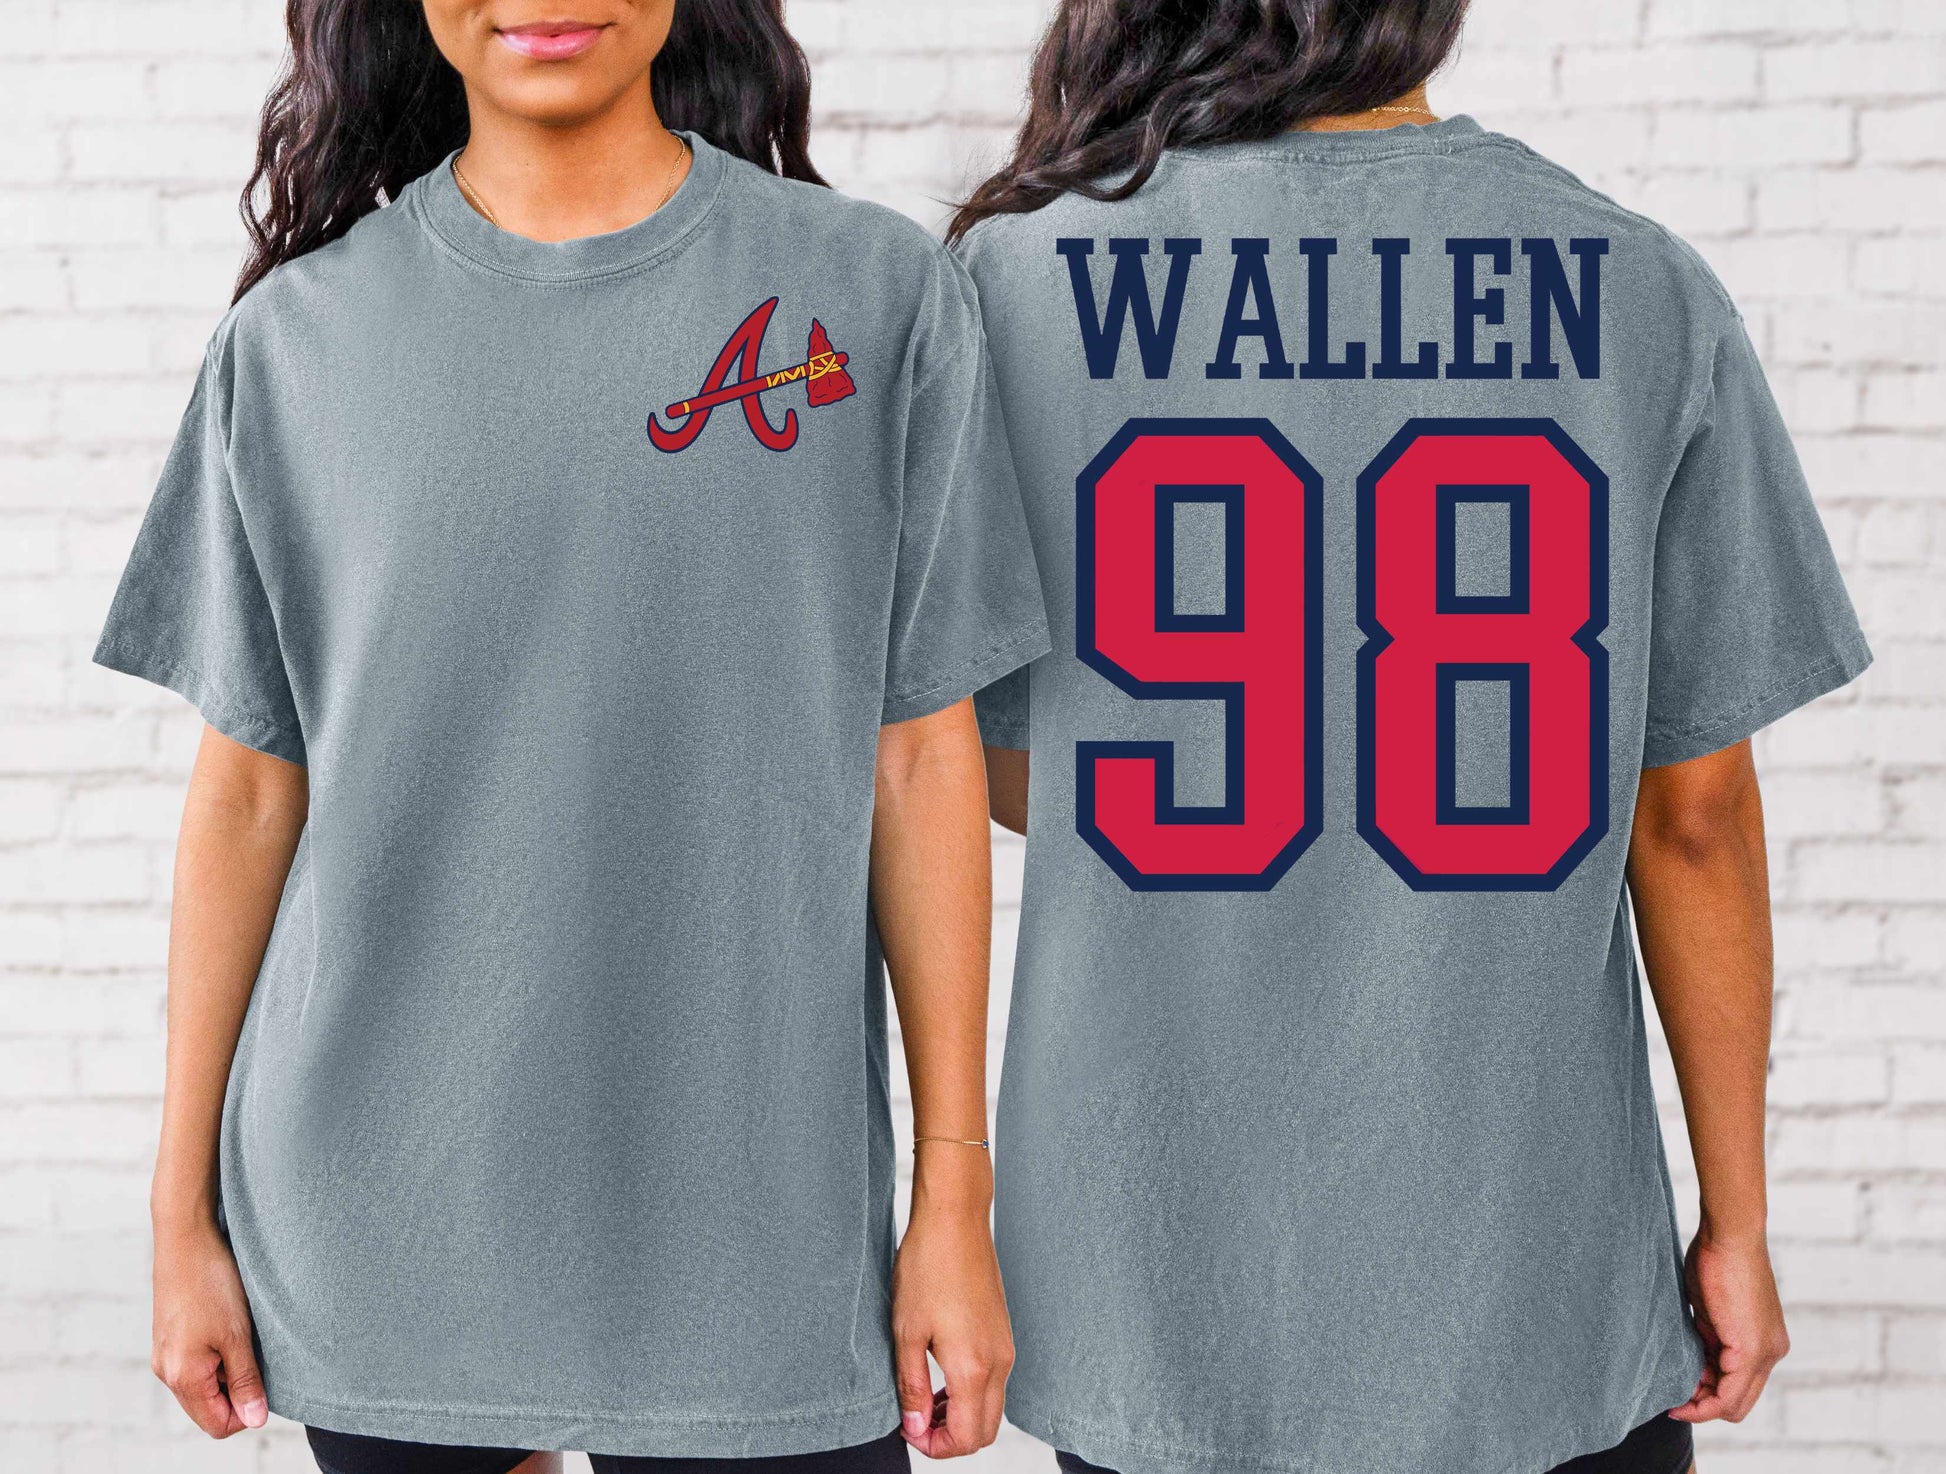 Wallen 98' Braves – ray101boutique